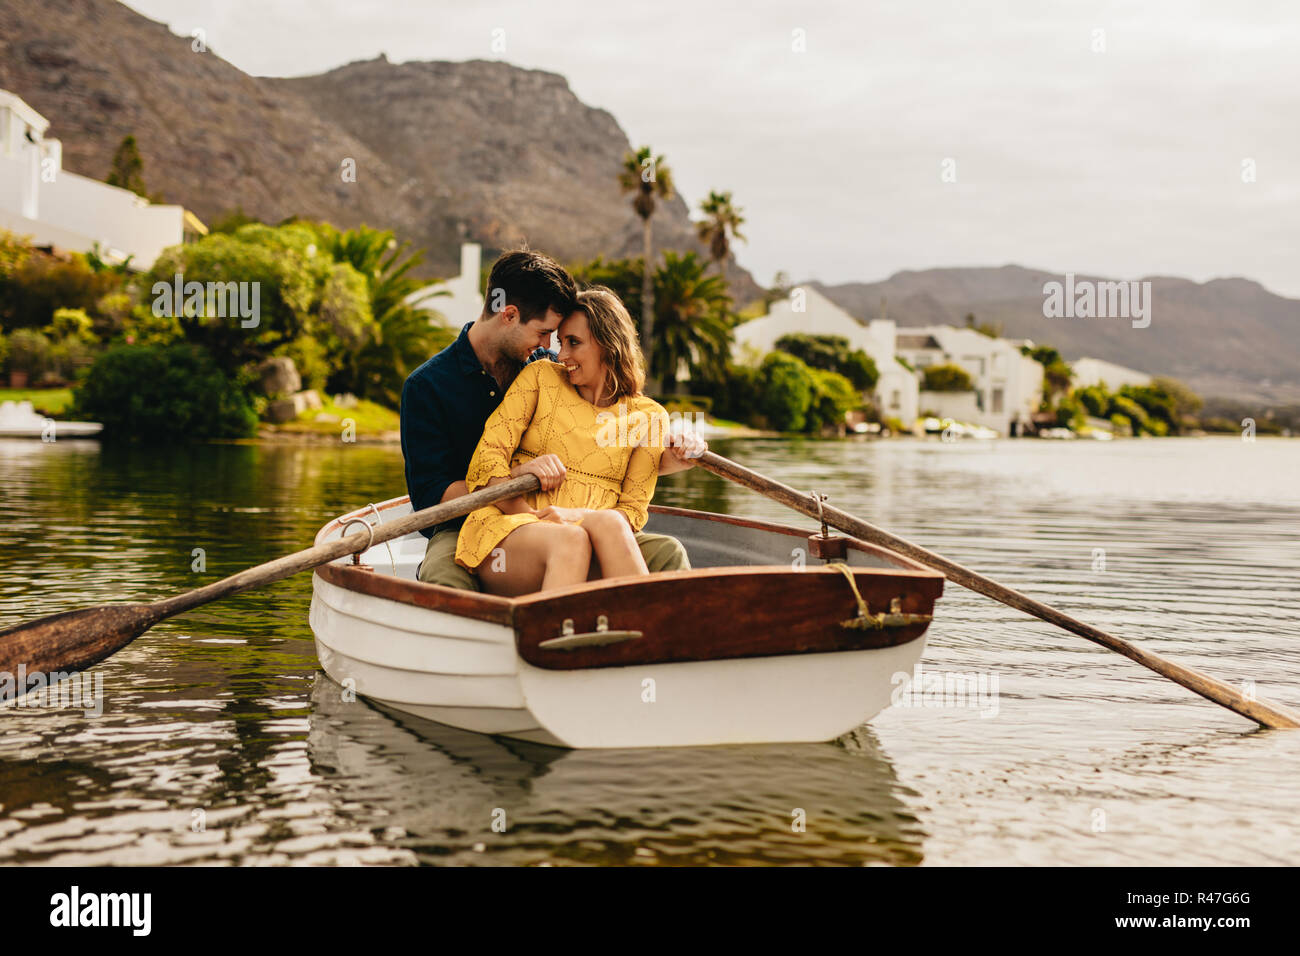 Young couple enjoying their boat date in a lake. Couple in love sitting together in a boat touching their heads looking at each other. Stock Photo